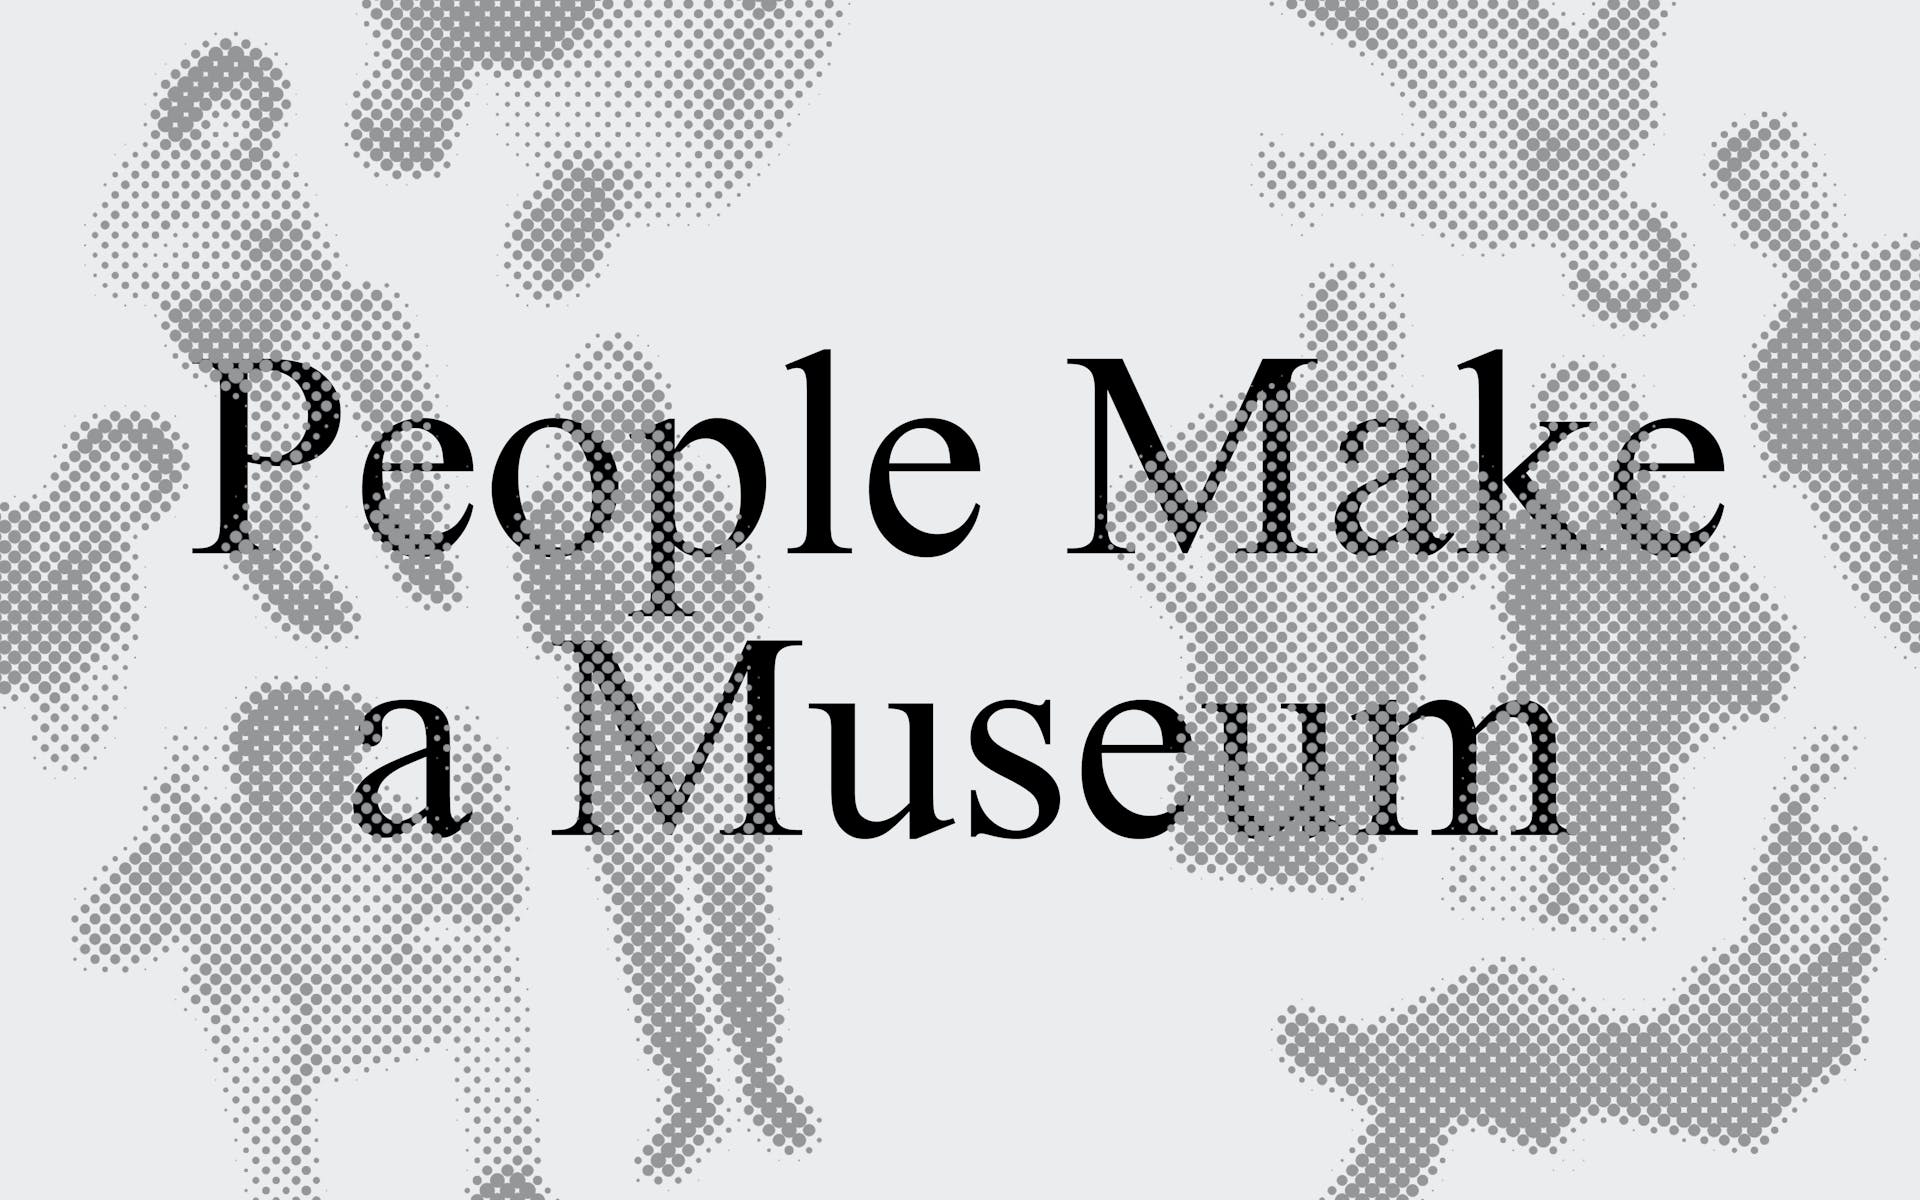 Gray images of people float in a slighter gray background behind the text "People Make a Museum"